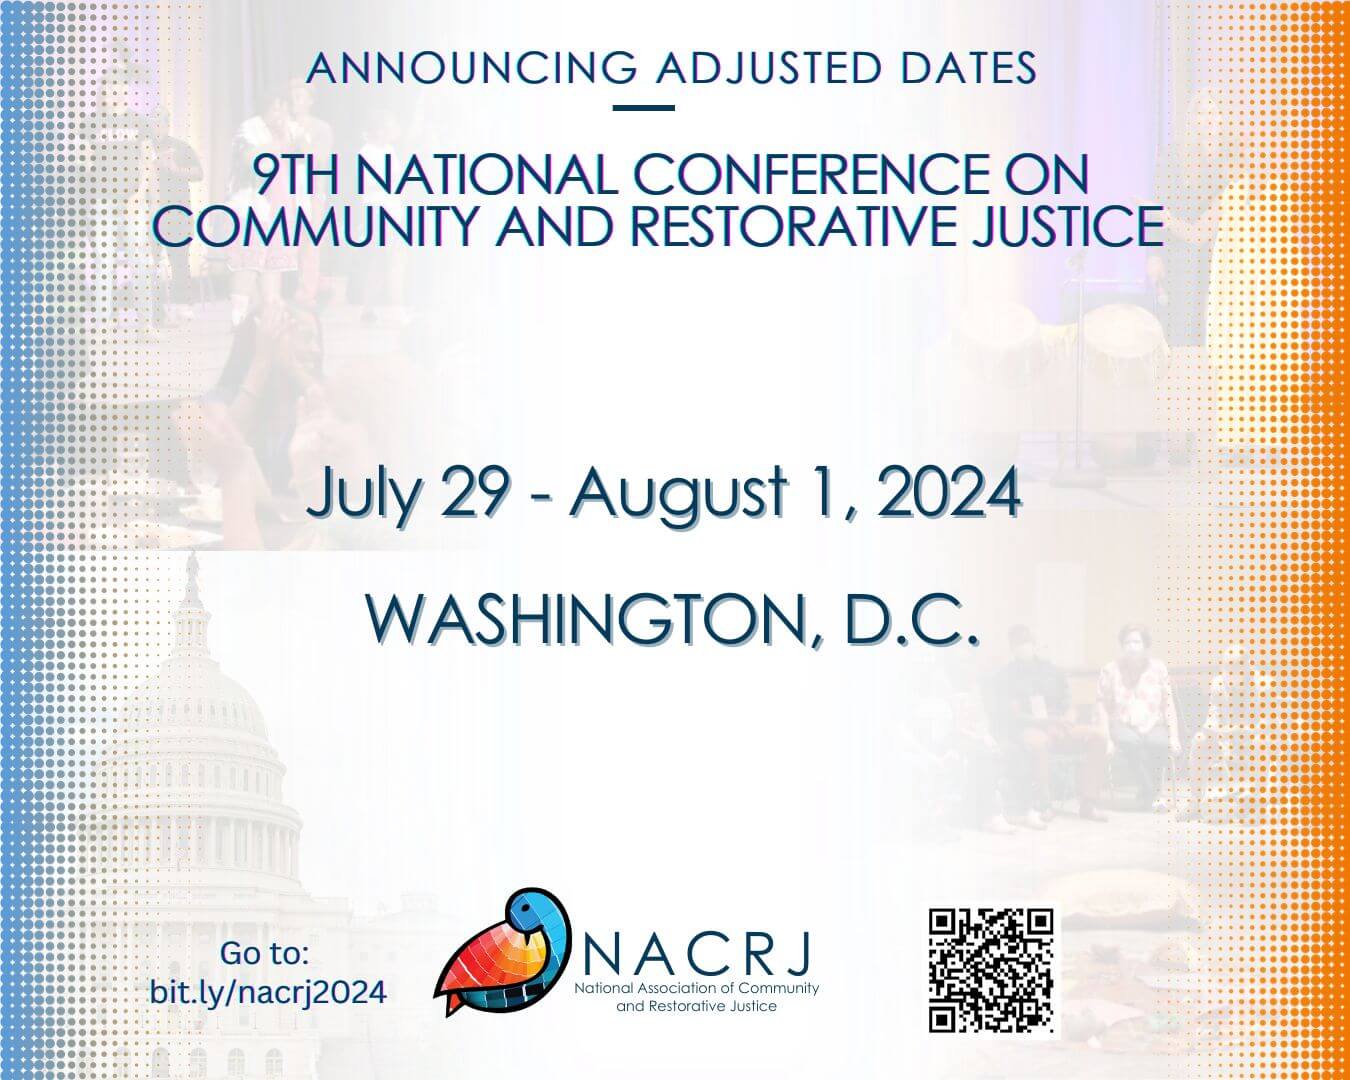 9th National Conference on Community and Restorative Justice, July 29 - August 1, 2024